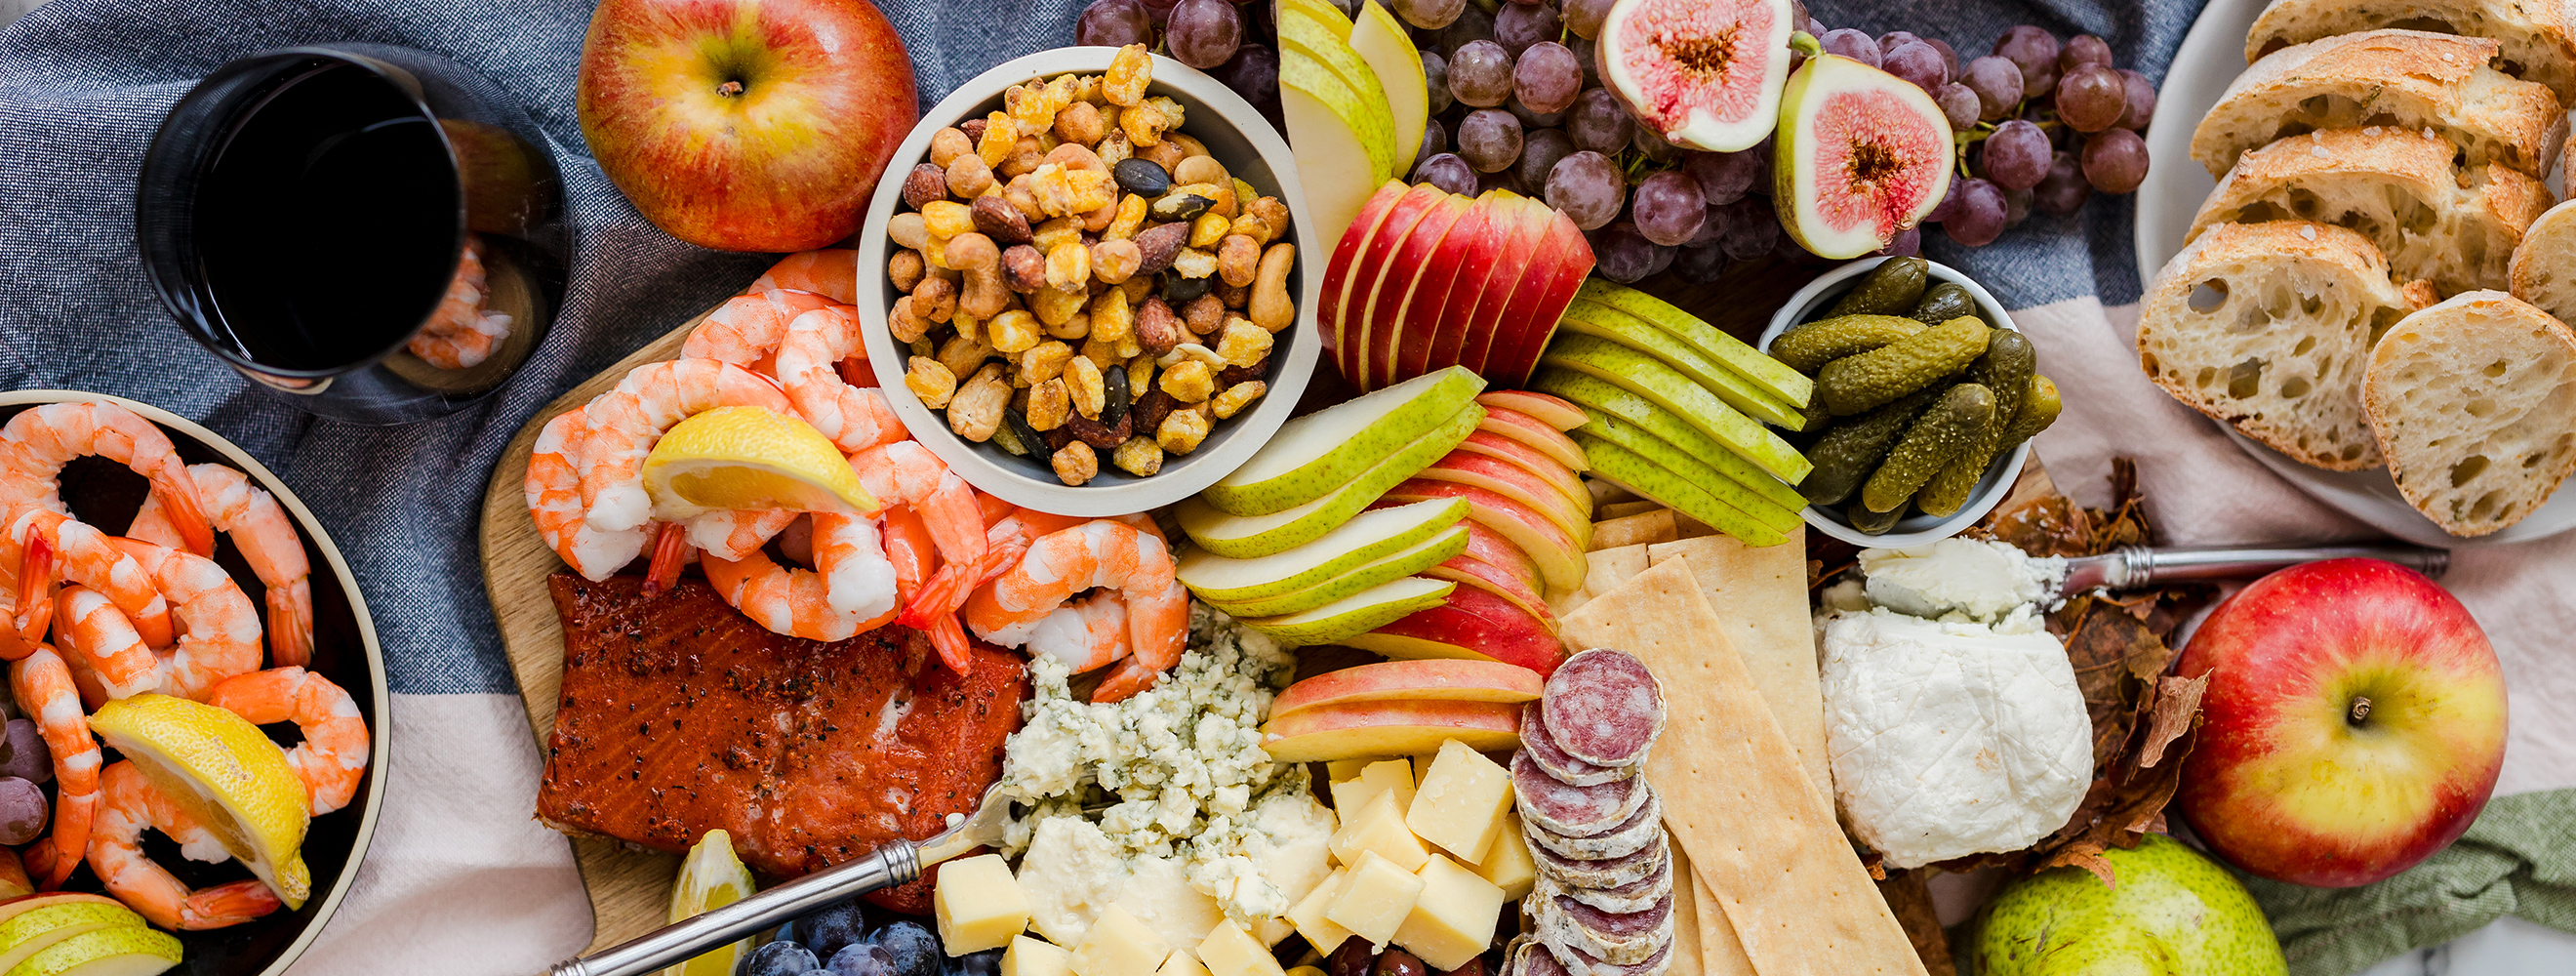 Fall charcuterie spread with apples, nuts, fruit, shrimp and more!